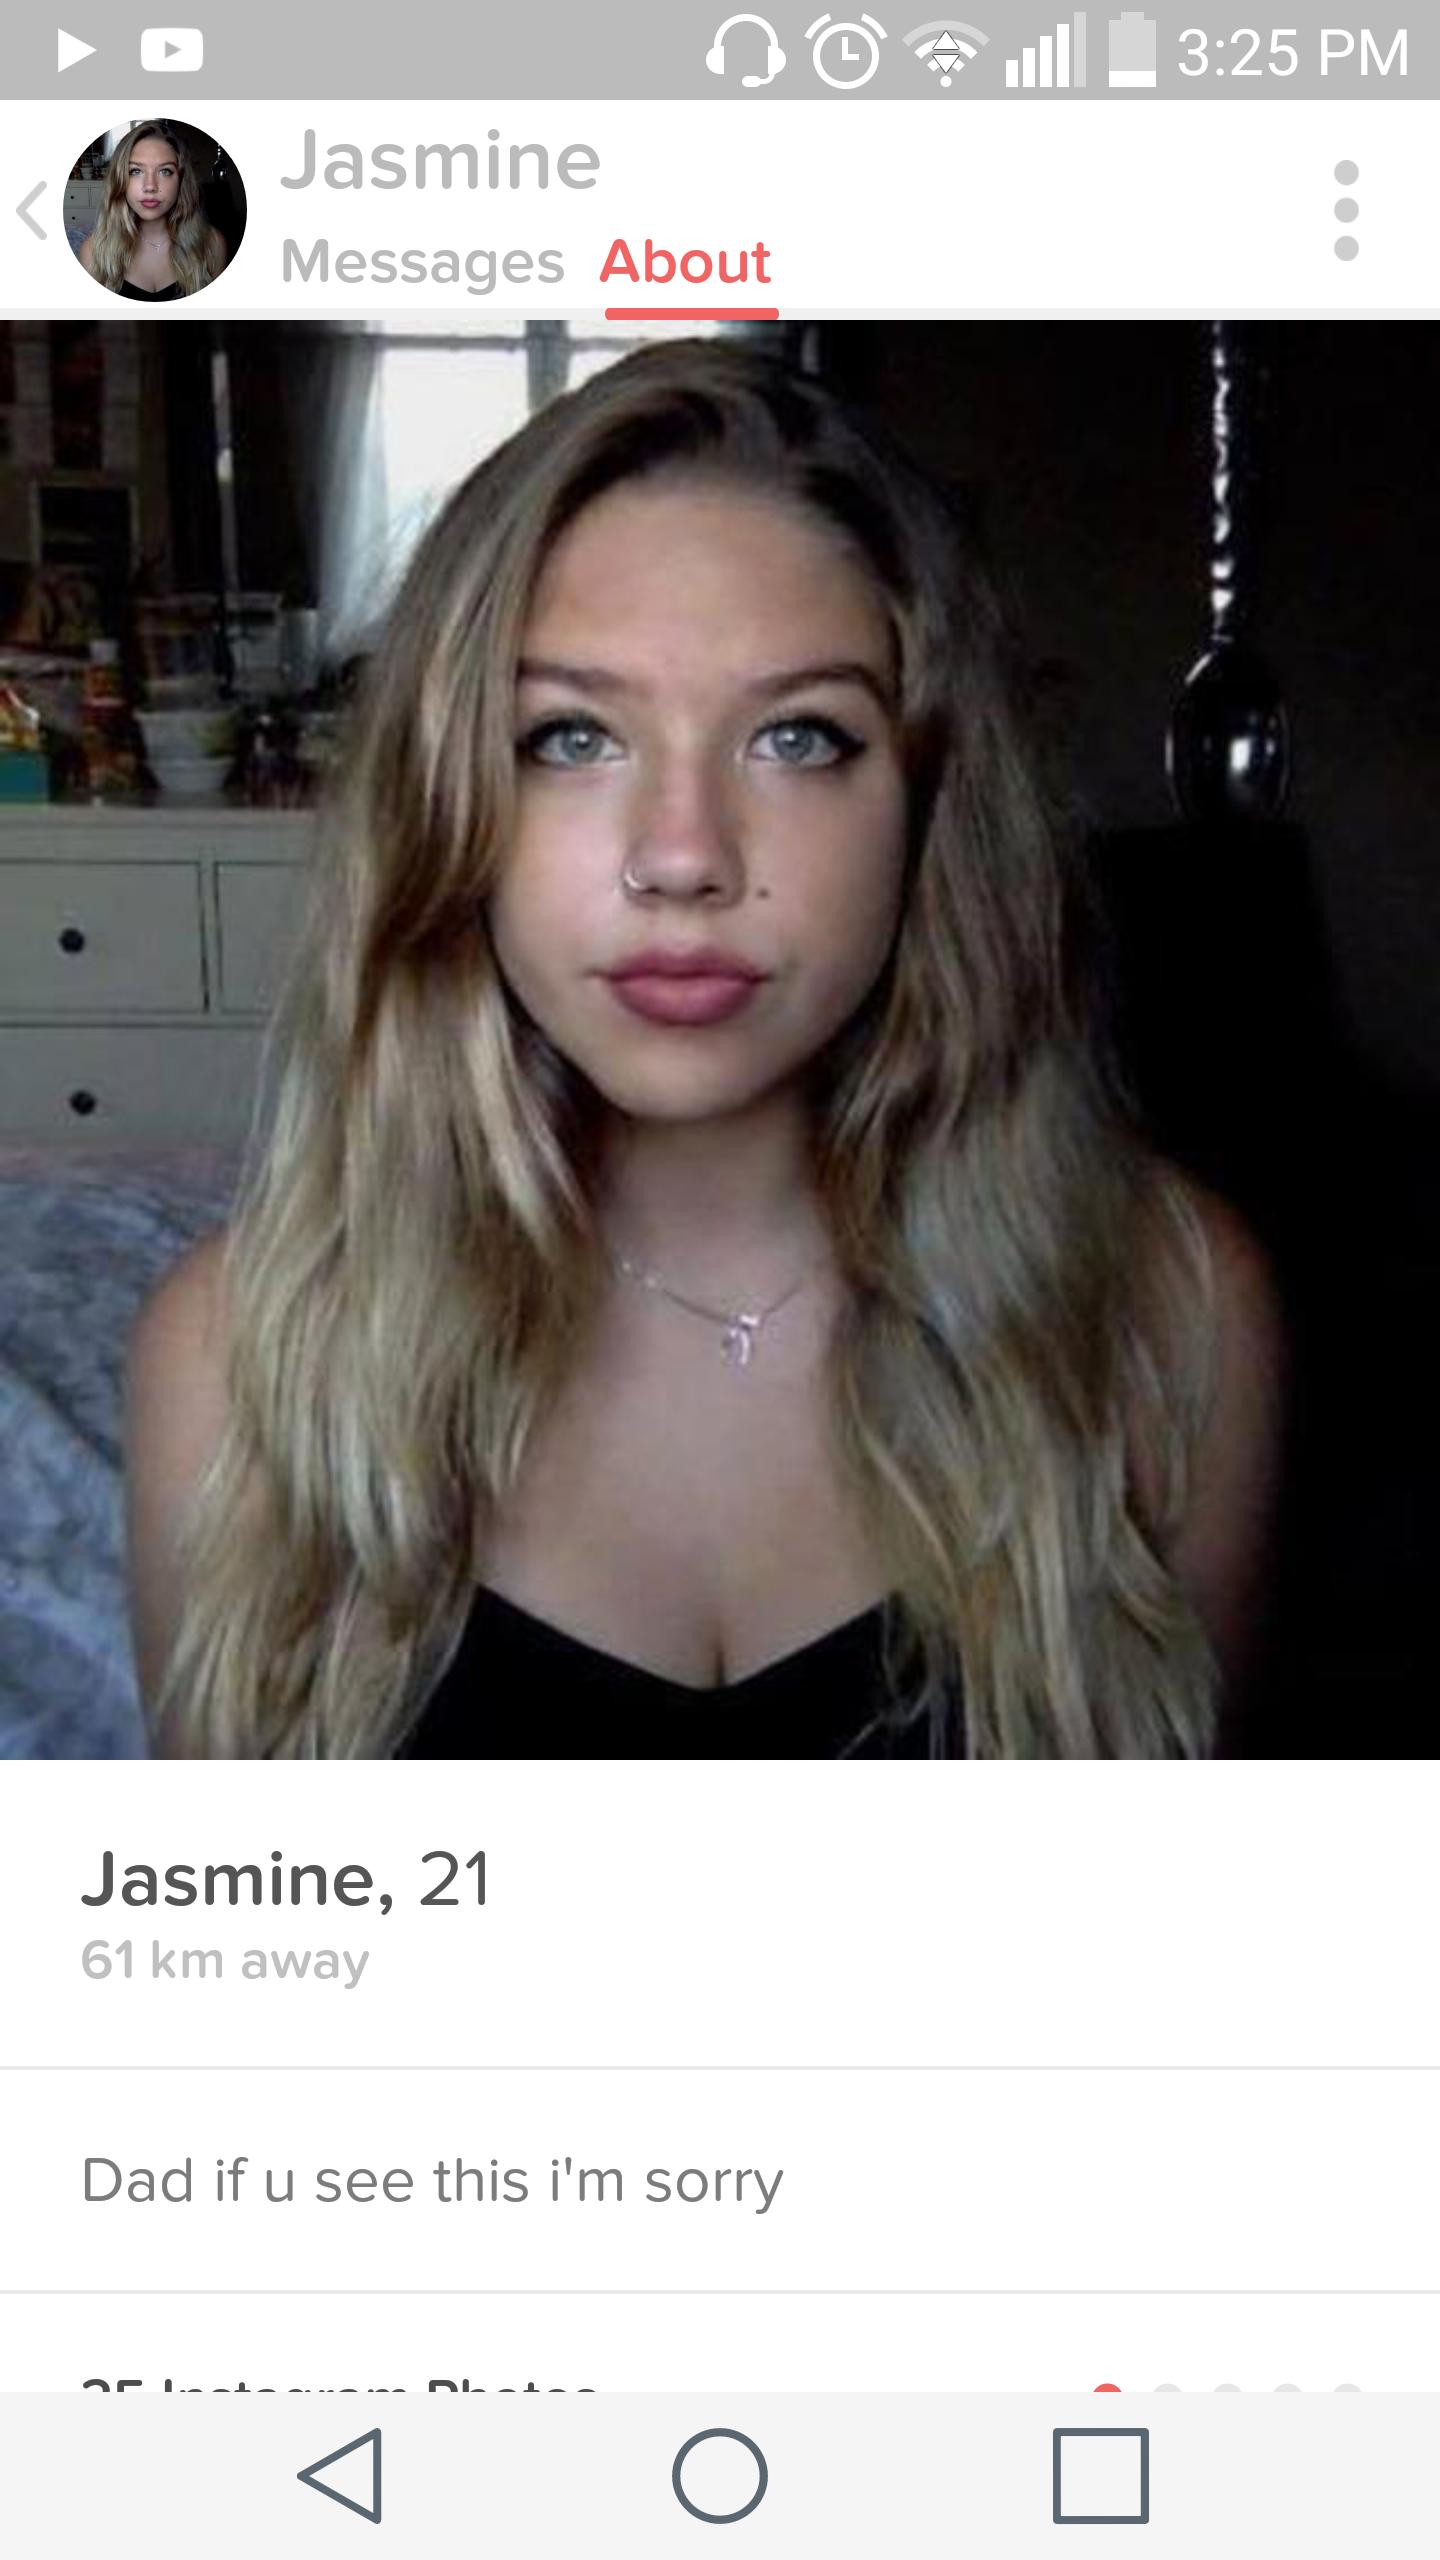 beauty - Jul Jasmine Messages About Jasmine, 21 61 km away Dad if u see this i'm sorry To